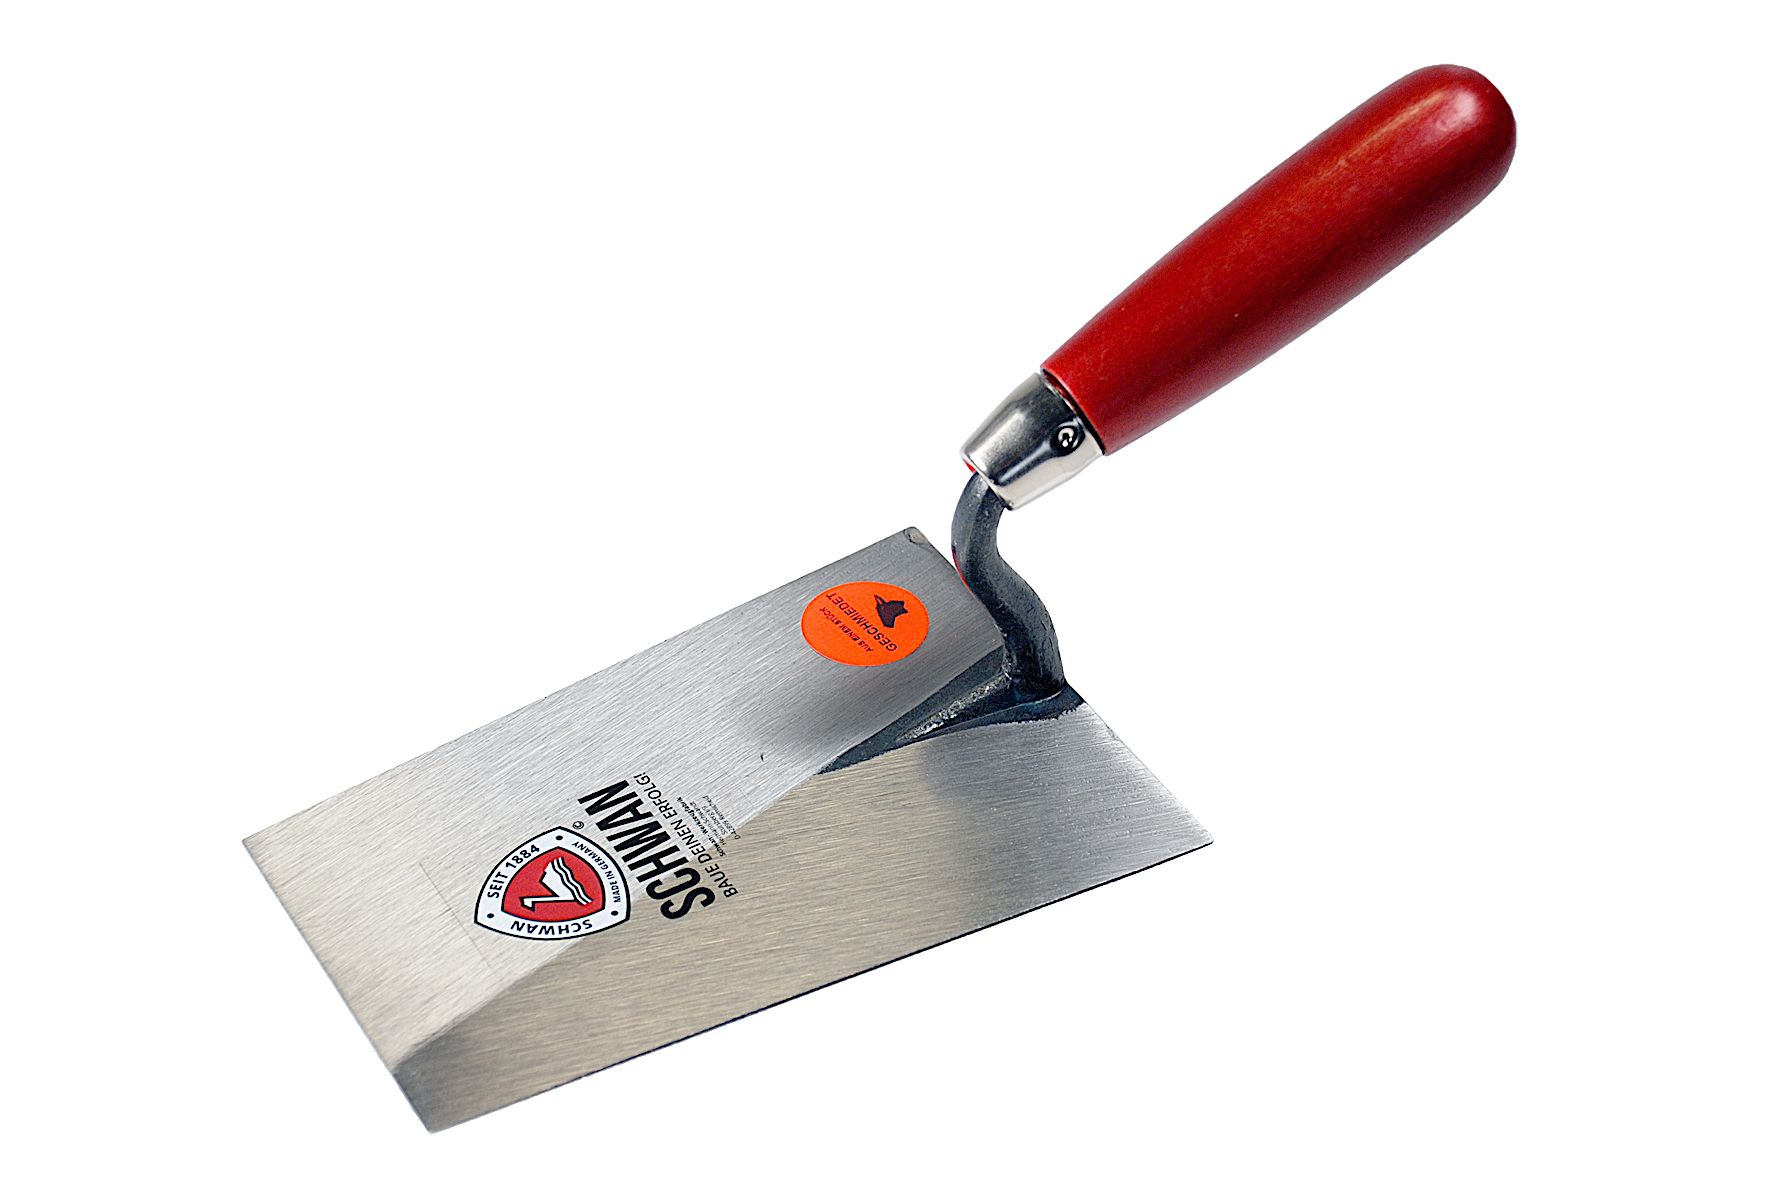 The Collar S 10 mm Steel Trowel 180 mm Haromac Made in Germany 11020180 